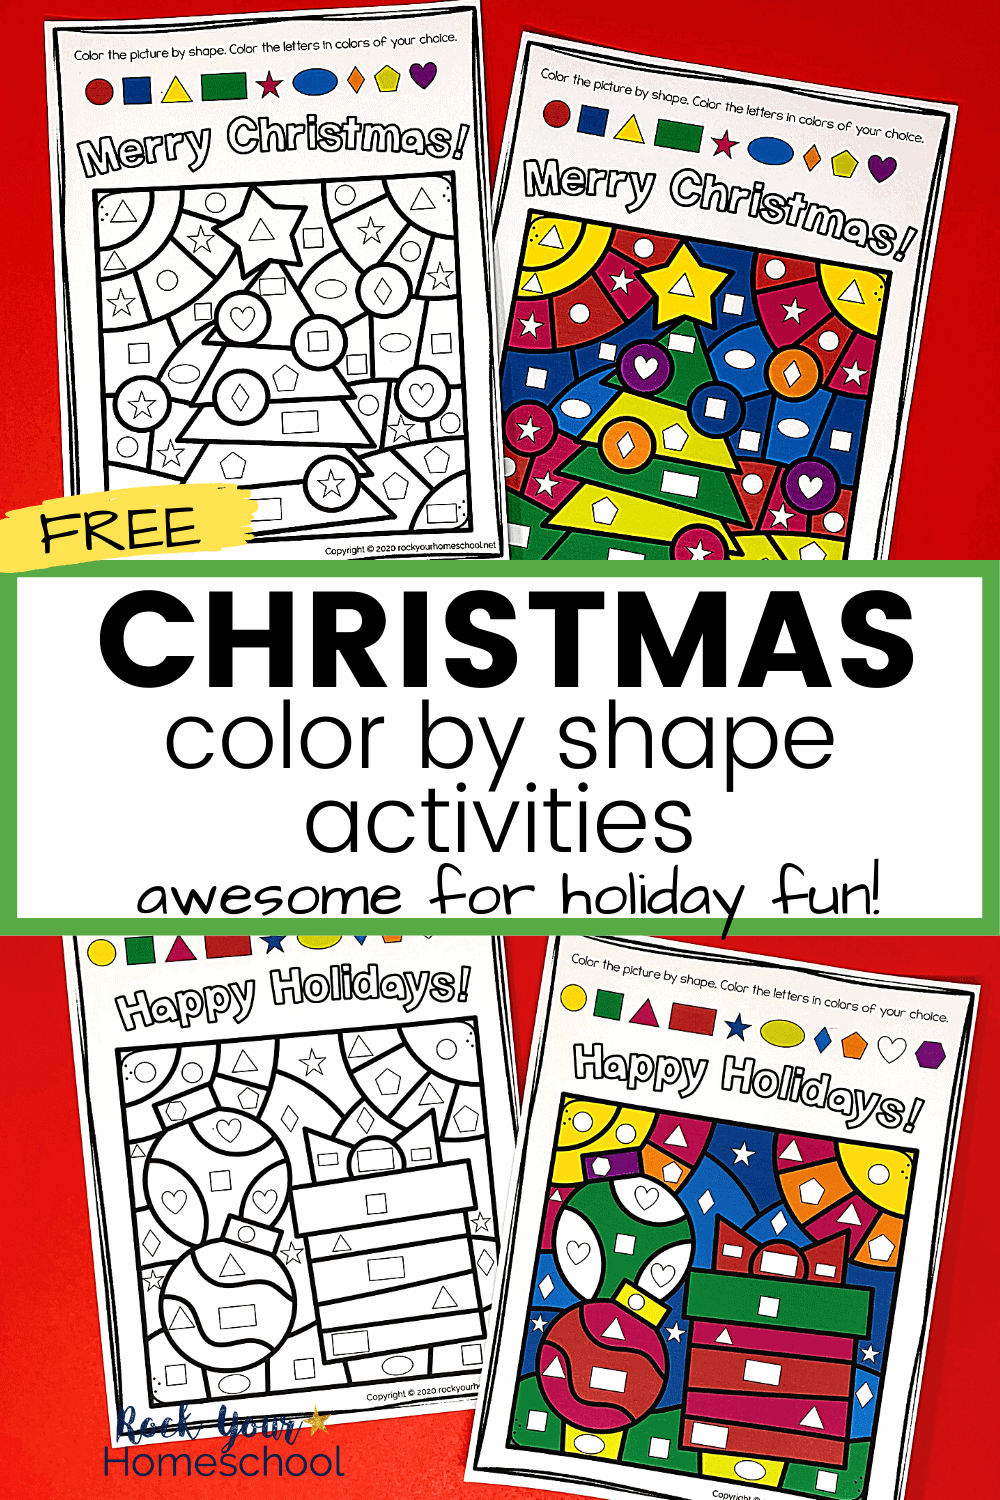 Free Christmas Coloring Activities for Amazing Holiday Fun